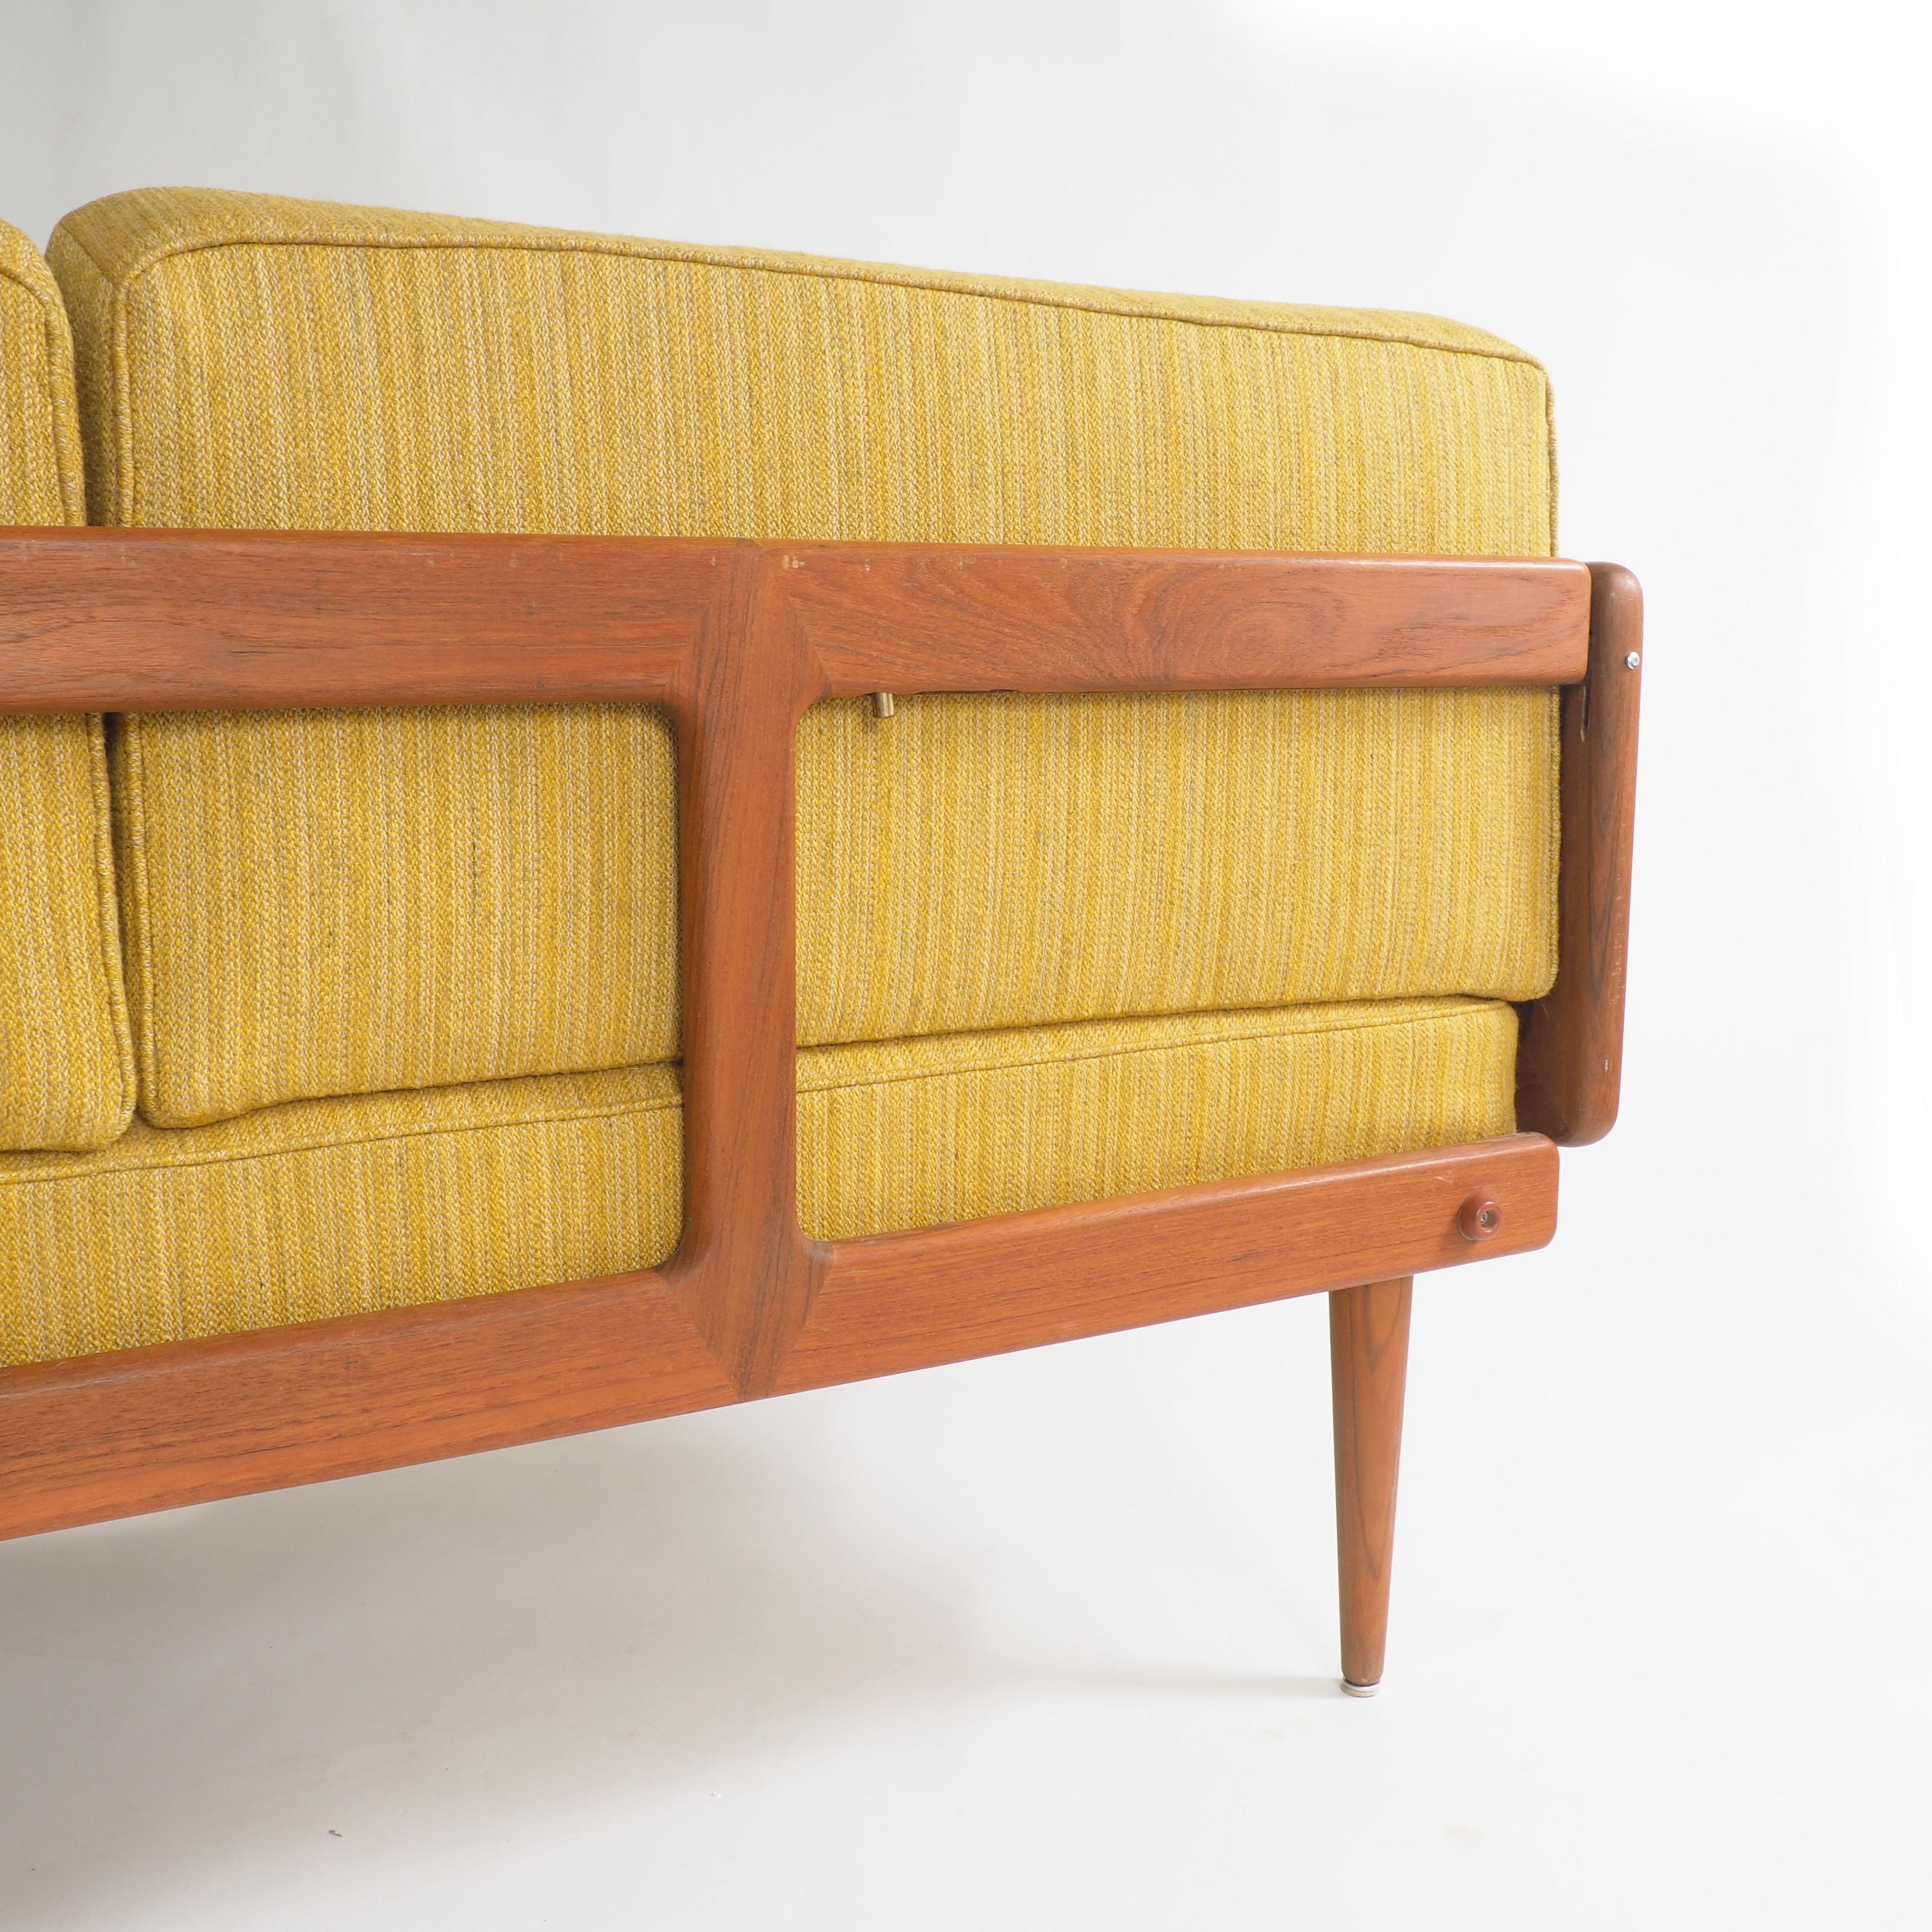 Mid-20th Century Sofa in Teak and Original Fabric by Peter Hvidt and Orla Mølgaard, Denmark